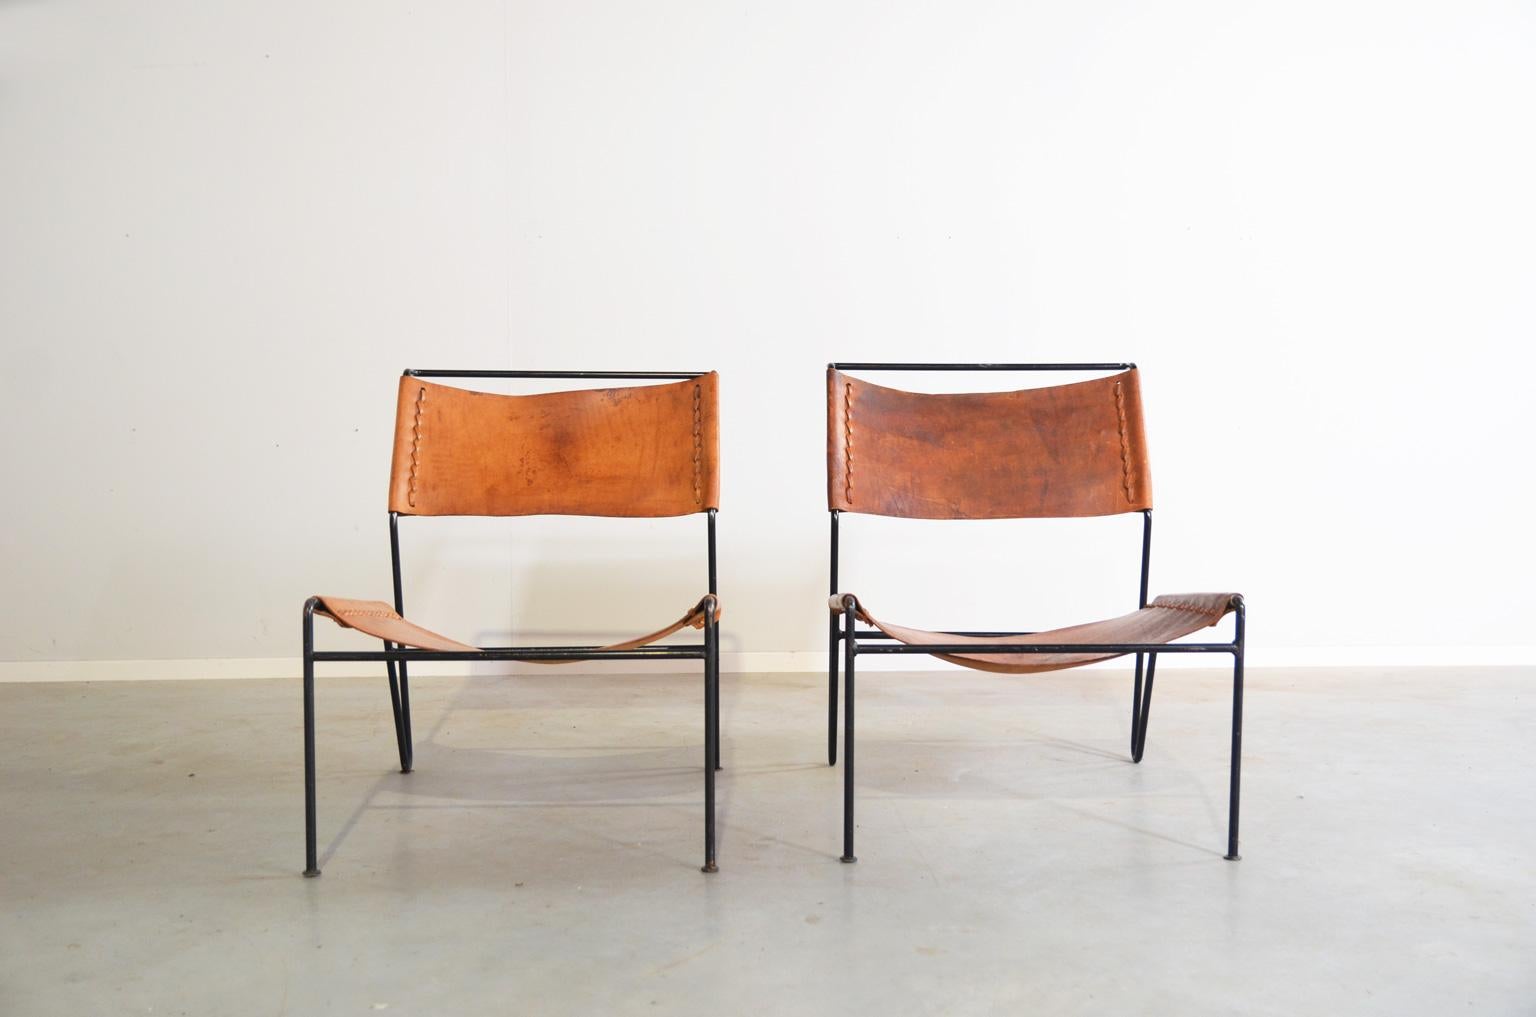 Lacquered A. Dolleman Lounge Chairs for Metz & Co, Netherlands